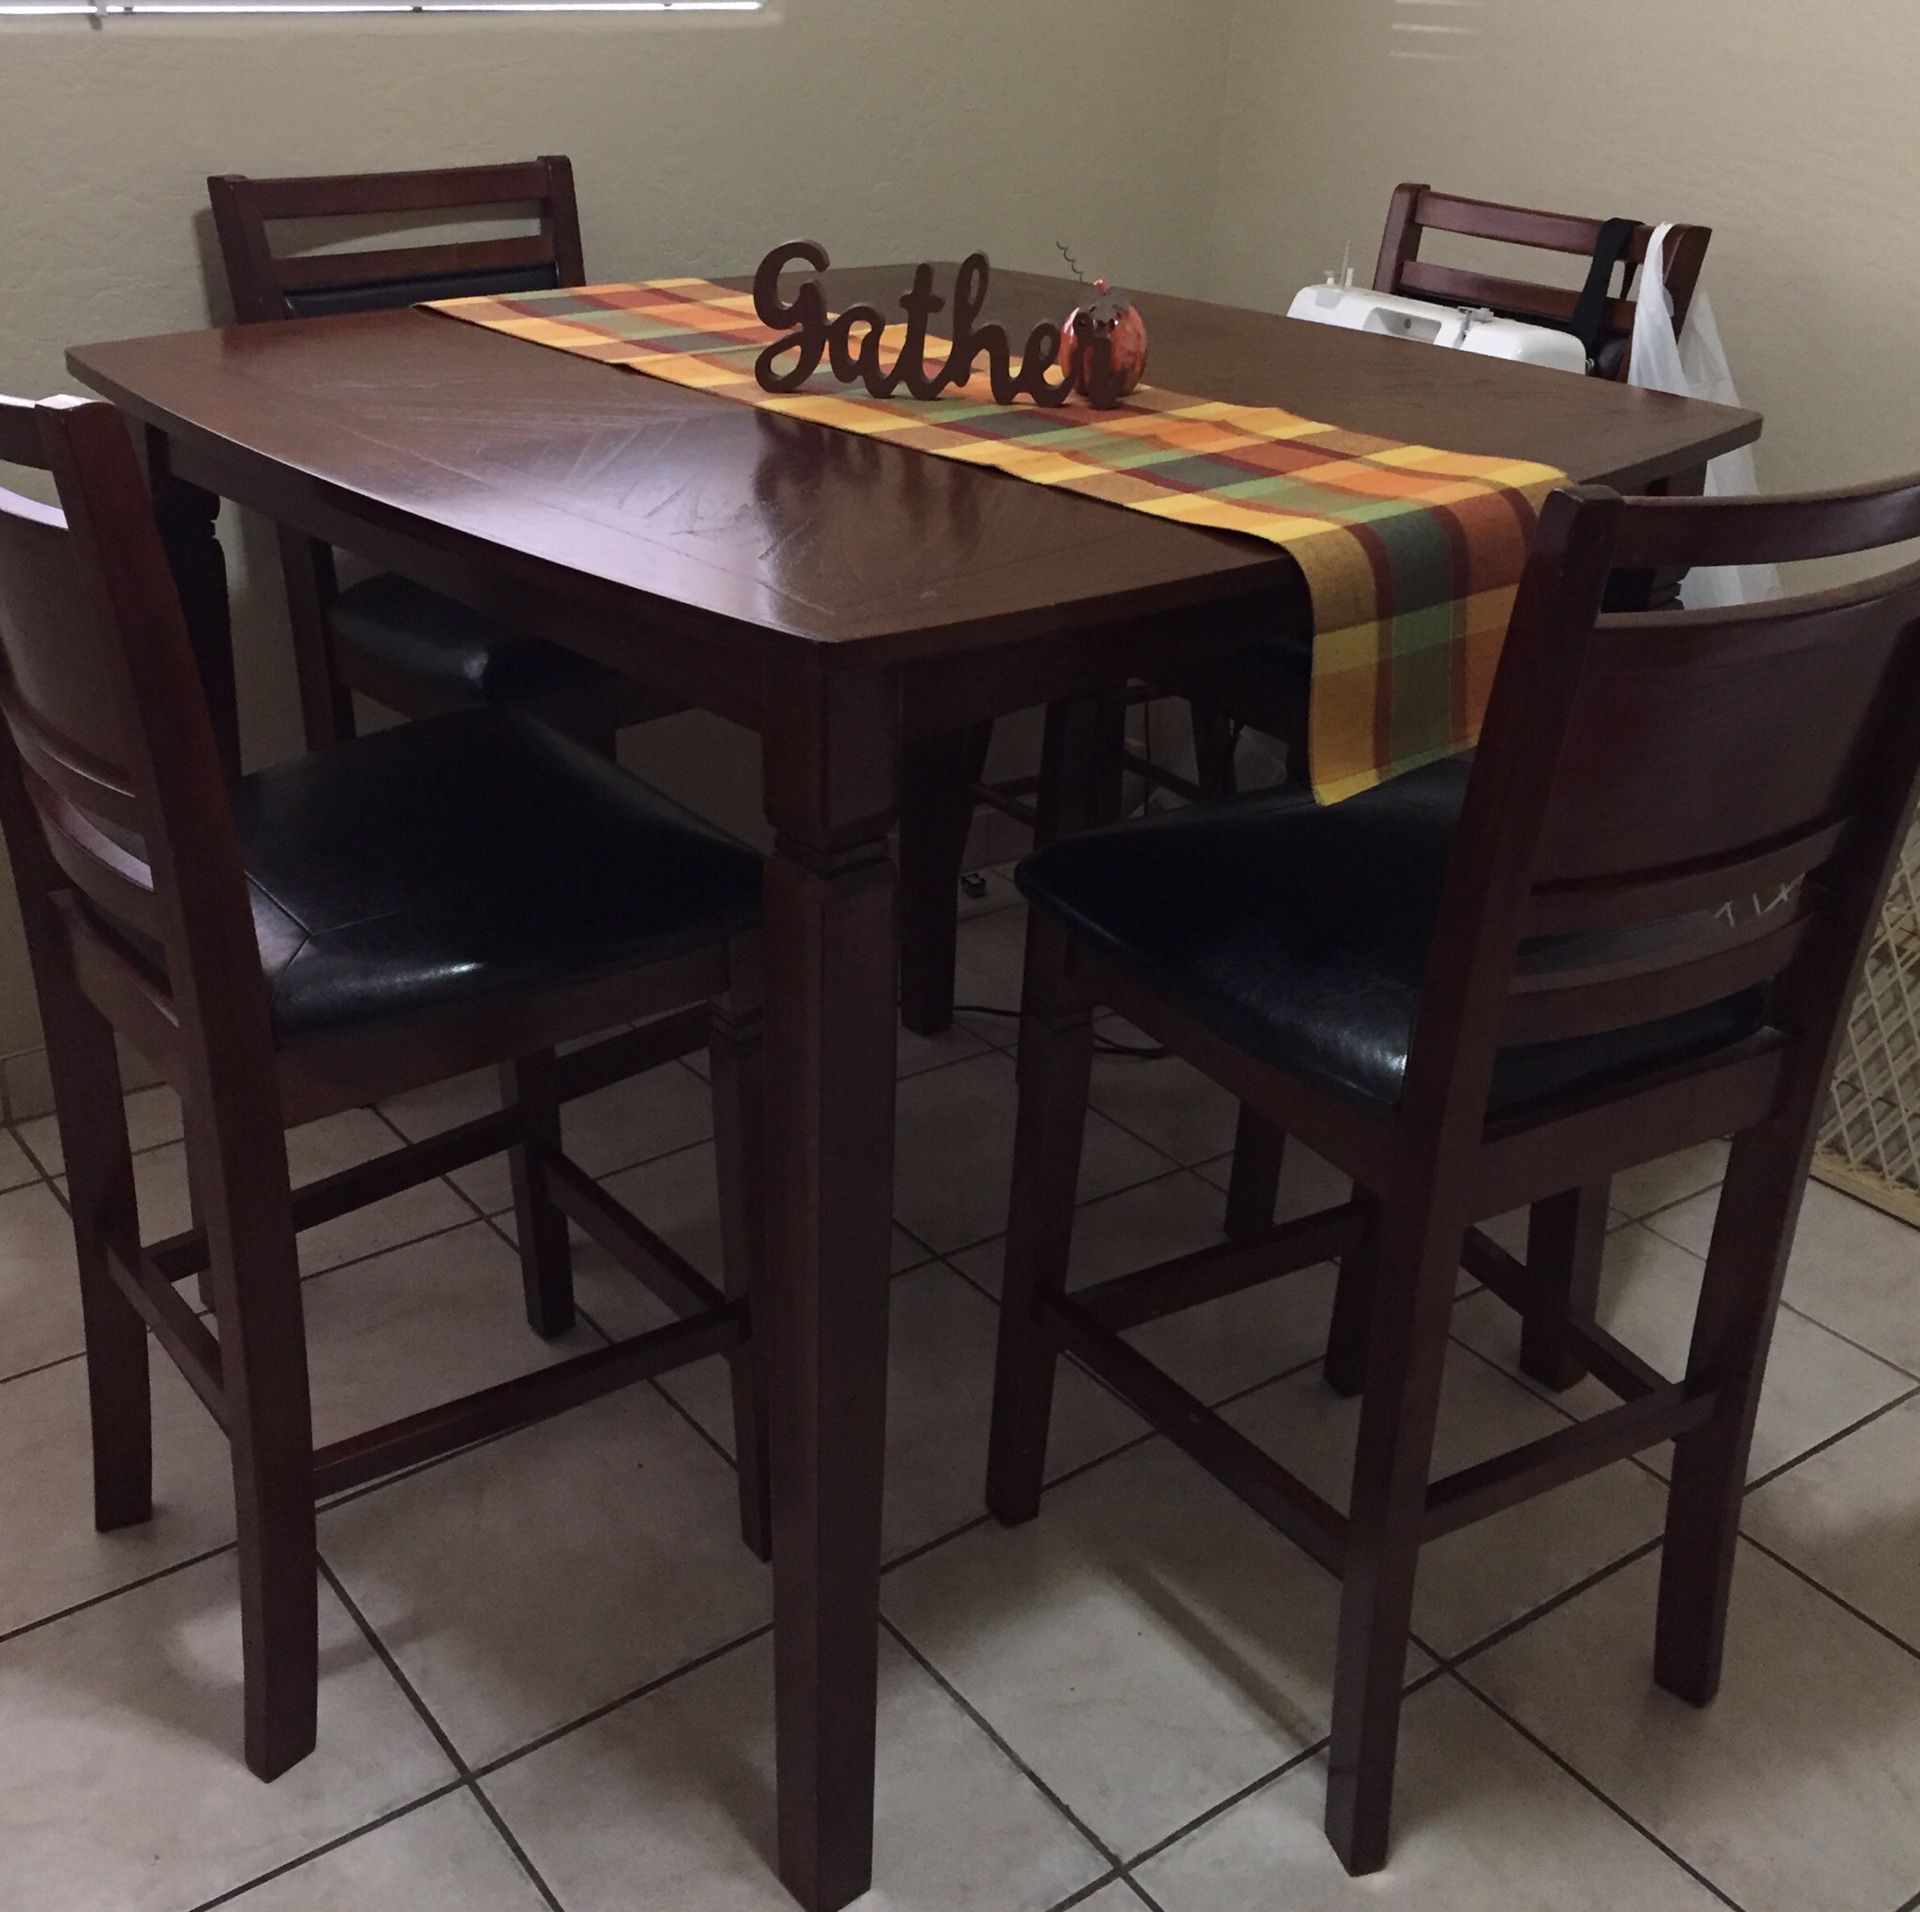 Tall dining table set four chairs kitchen table